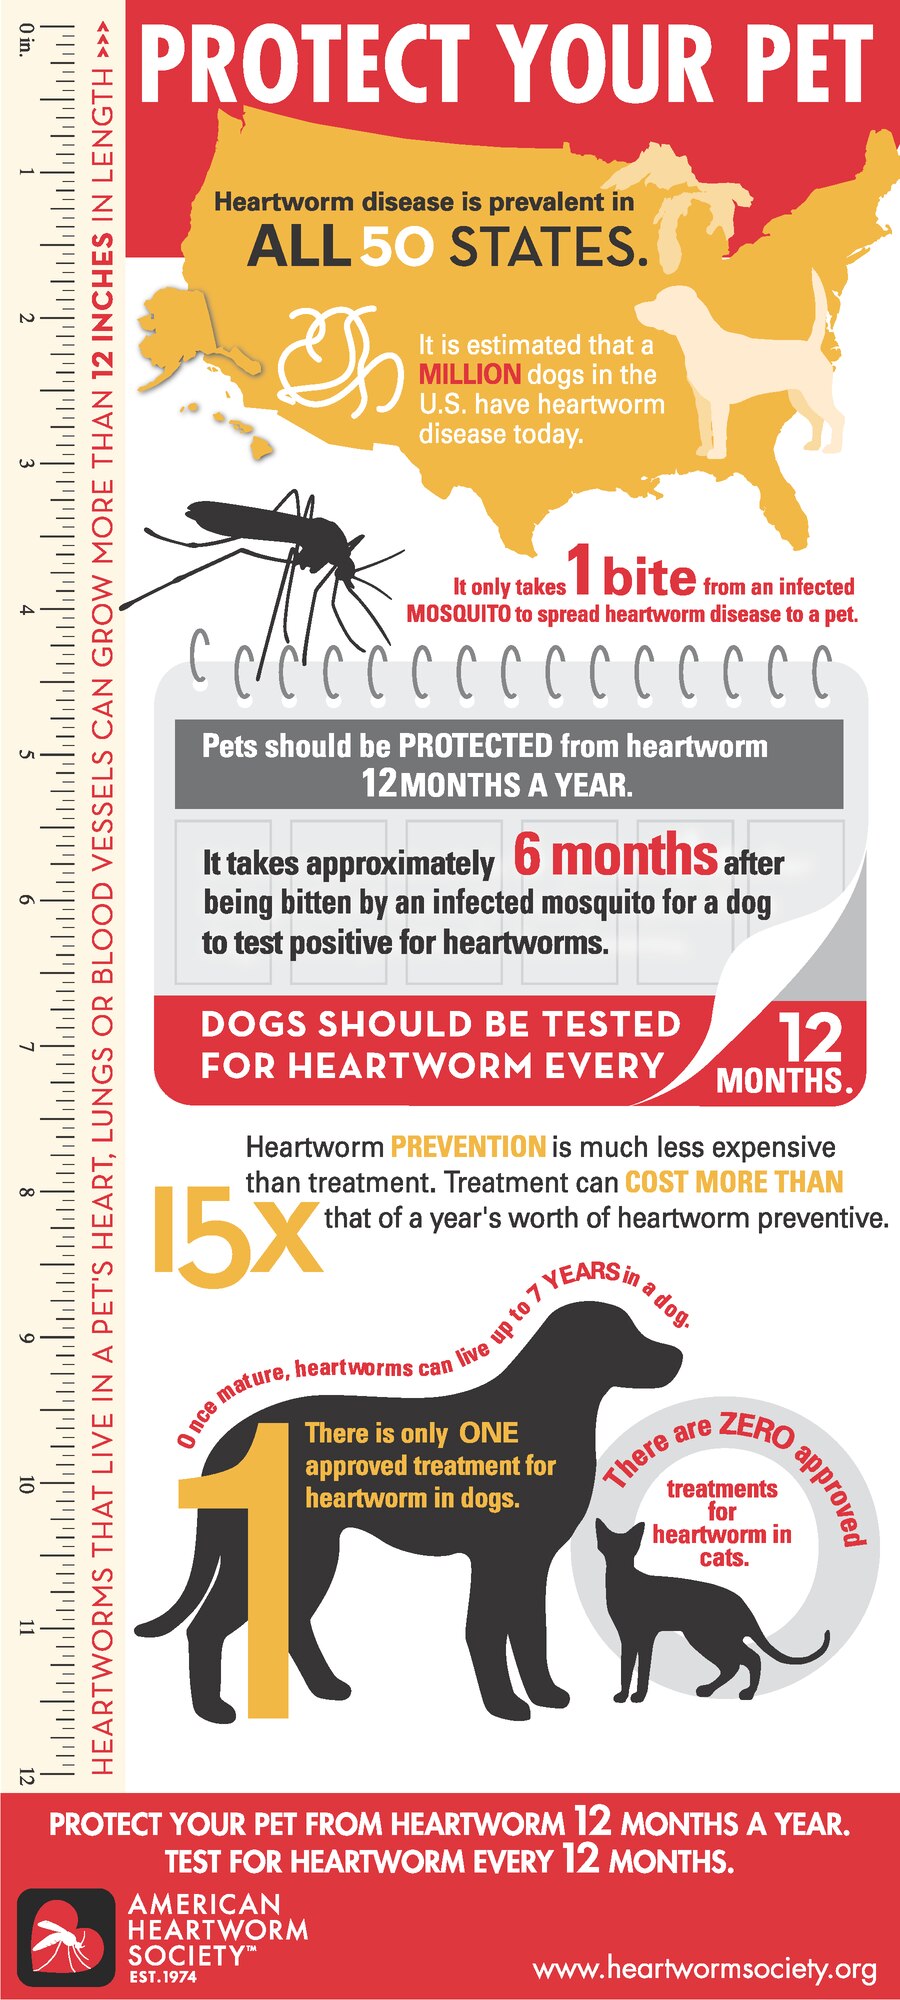 Poster showing illustrations of animals and giving facts about heartworm infection and protection.